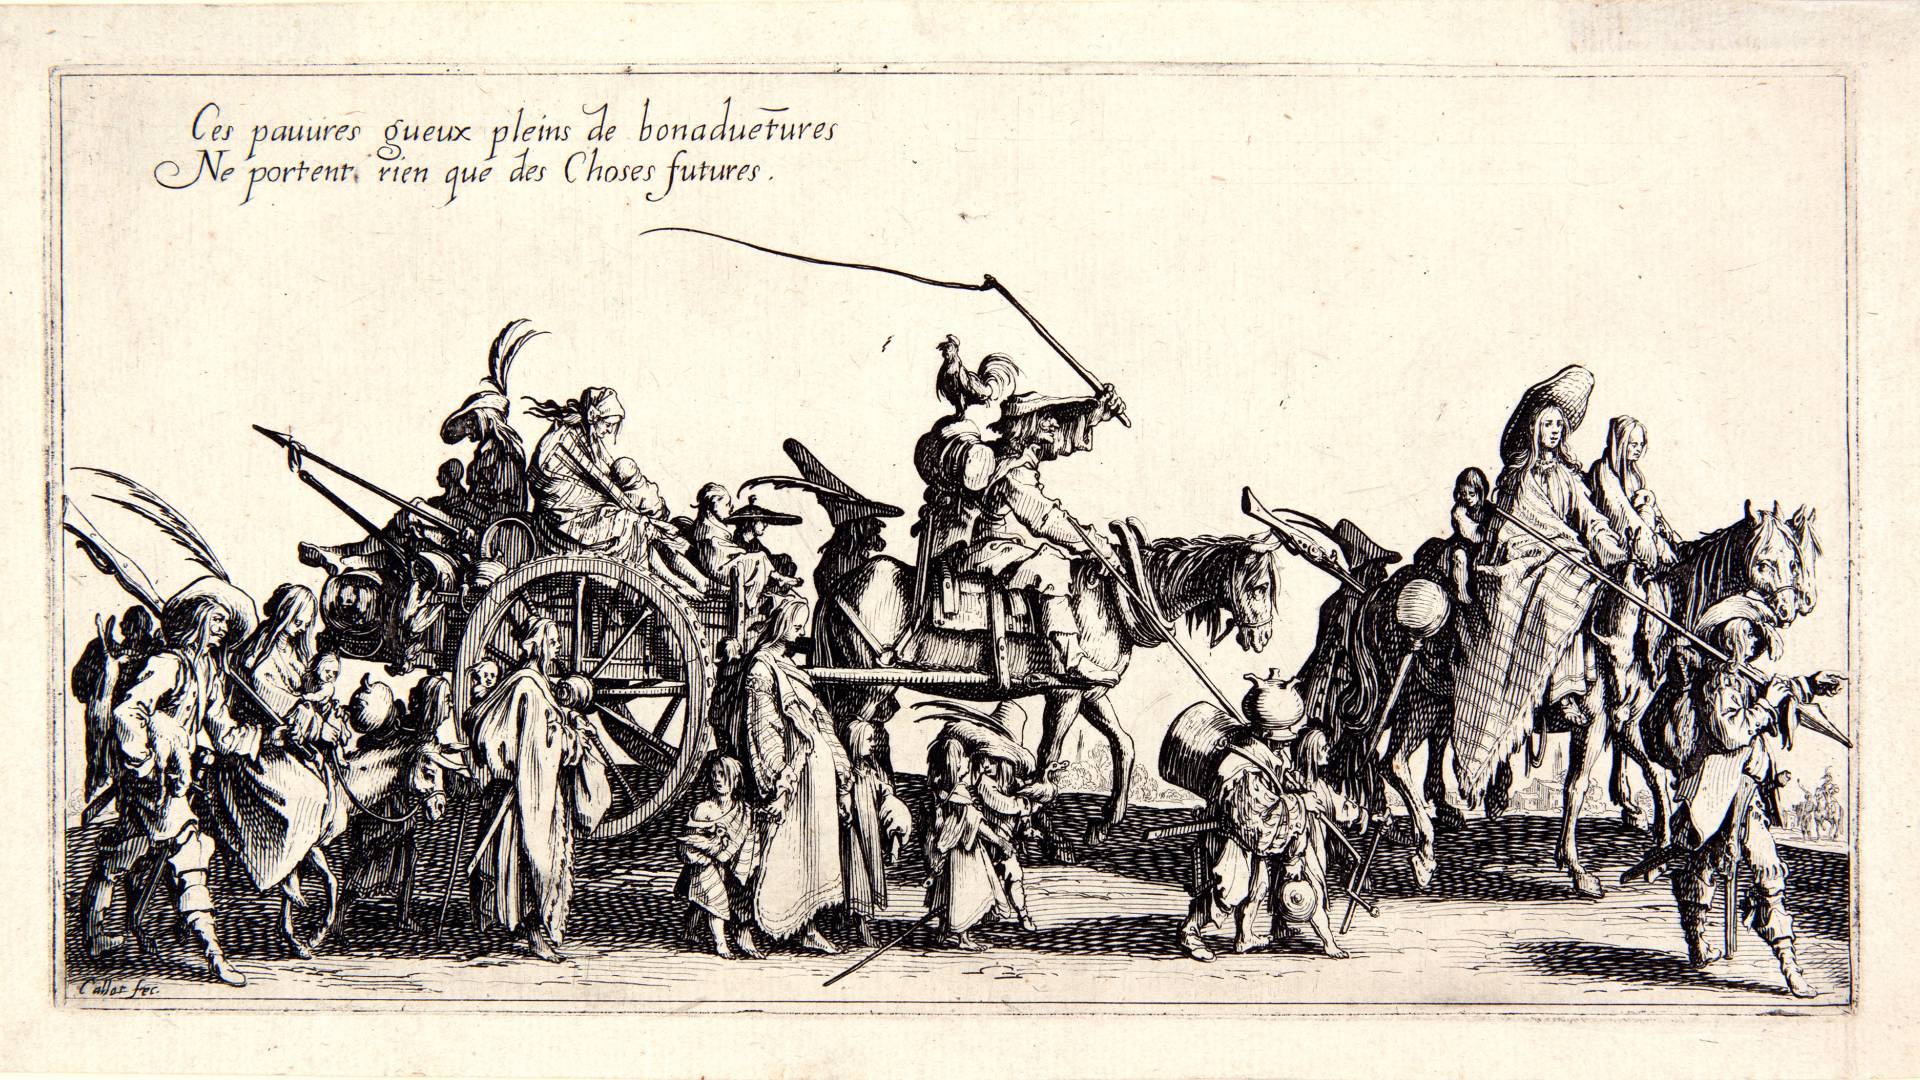 Etching of 17th century caravan of men, women, and children on foot, horseback, and wagon